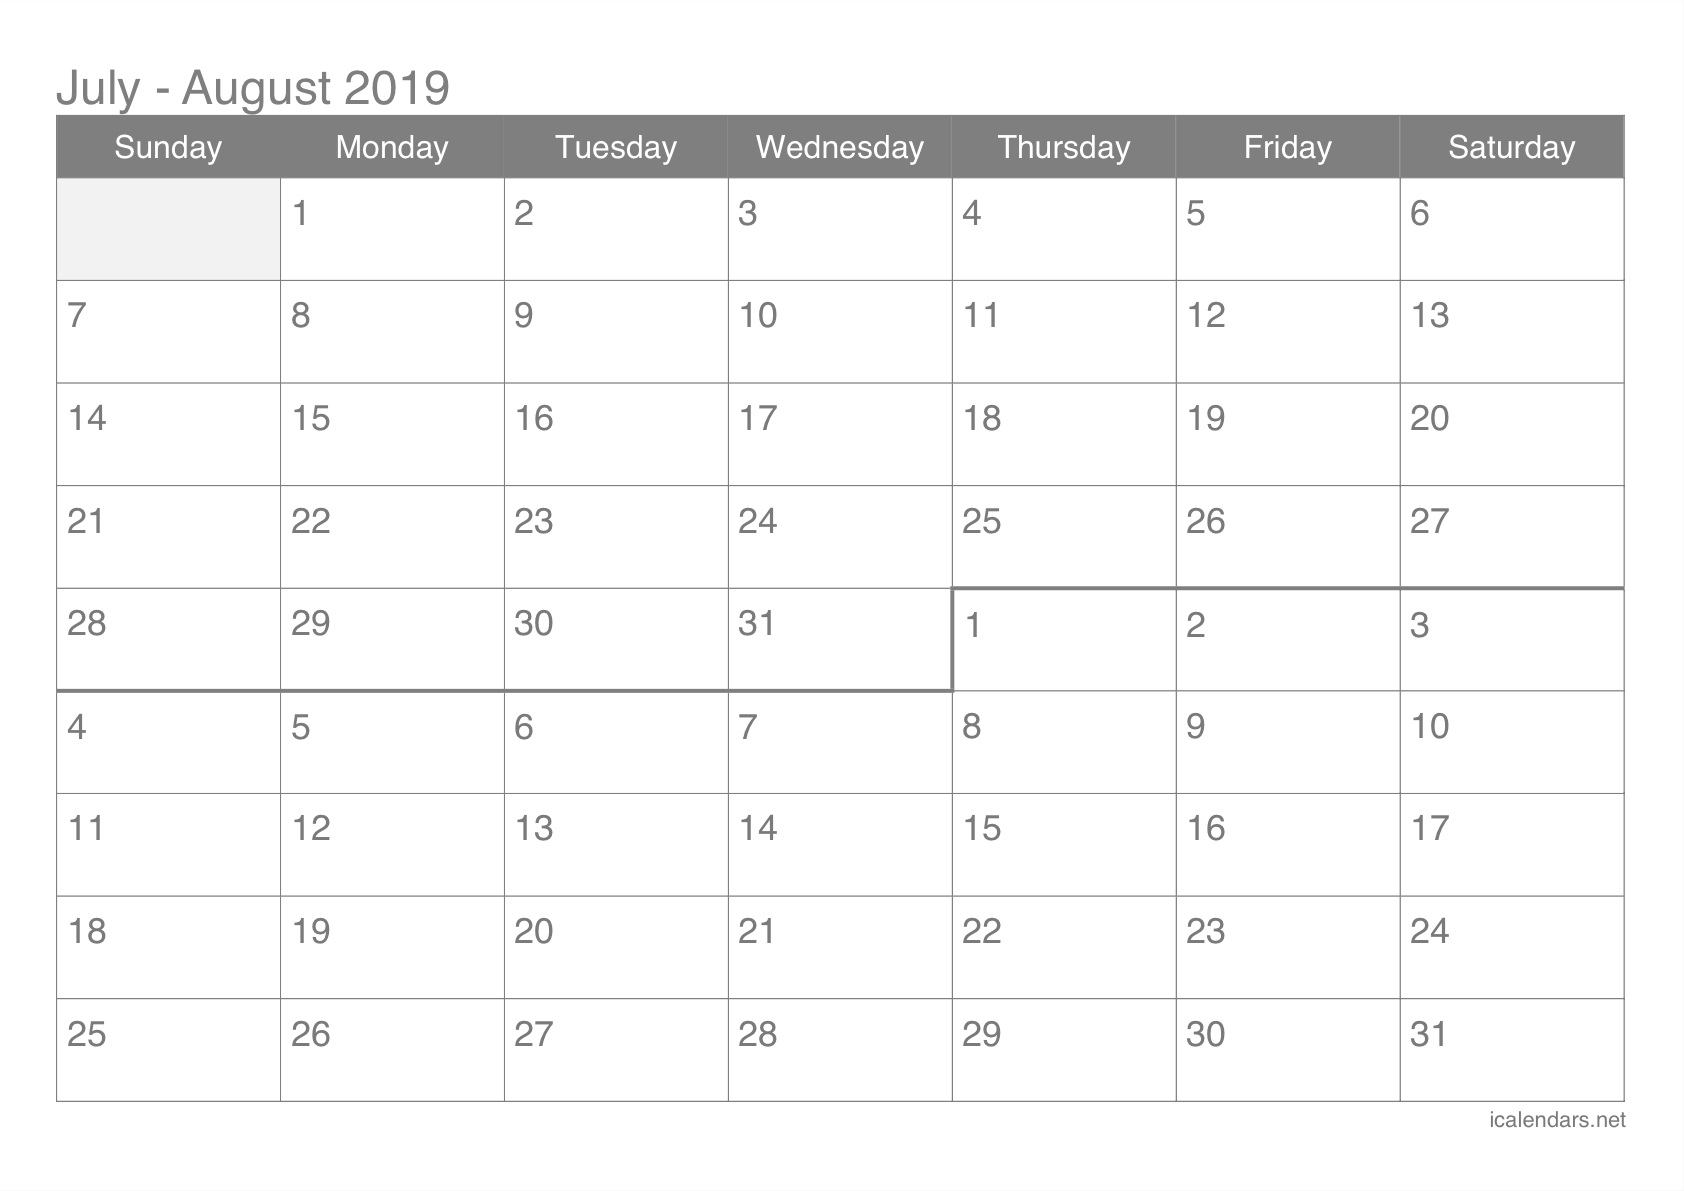 July And August 2019 Printable Calendar - Icalendars-Blank Timetable For The Month Of July And August